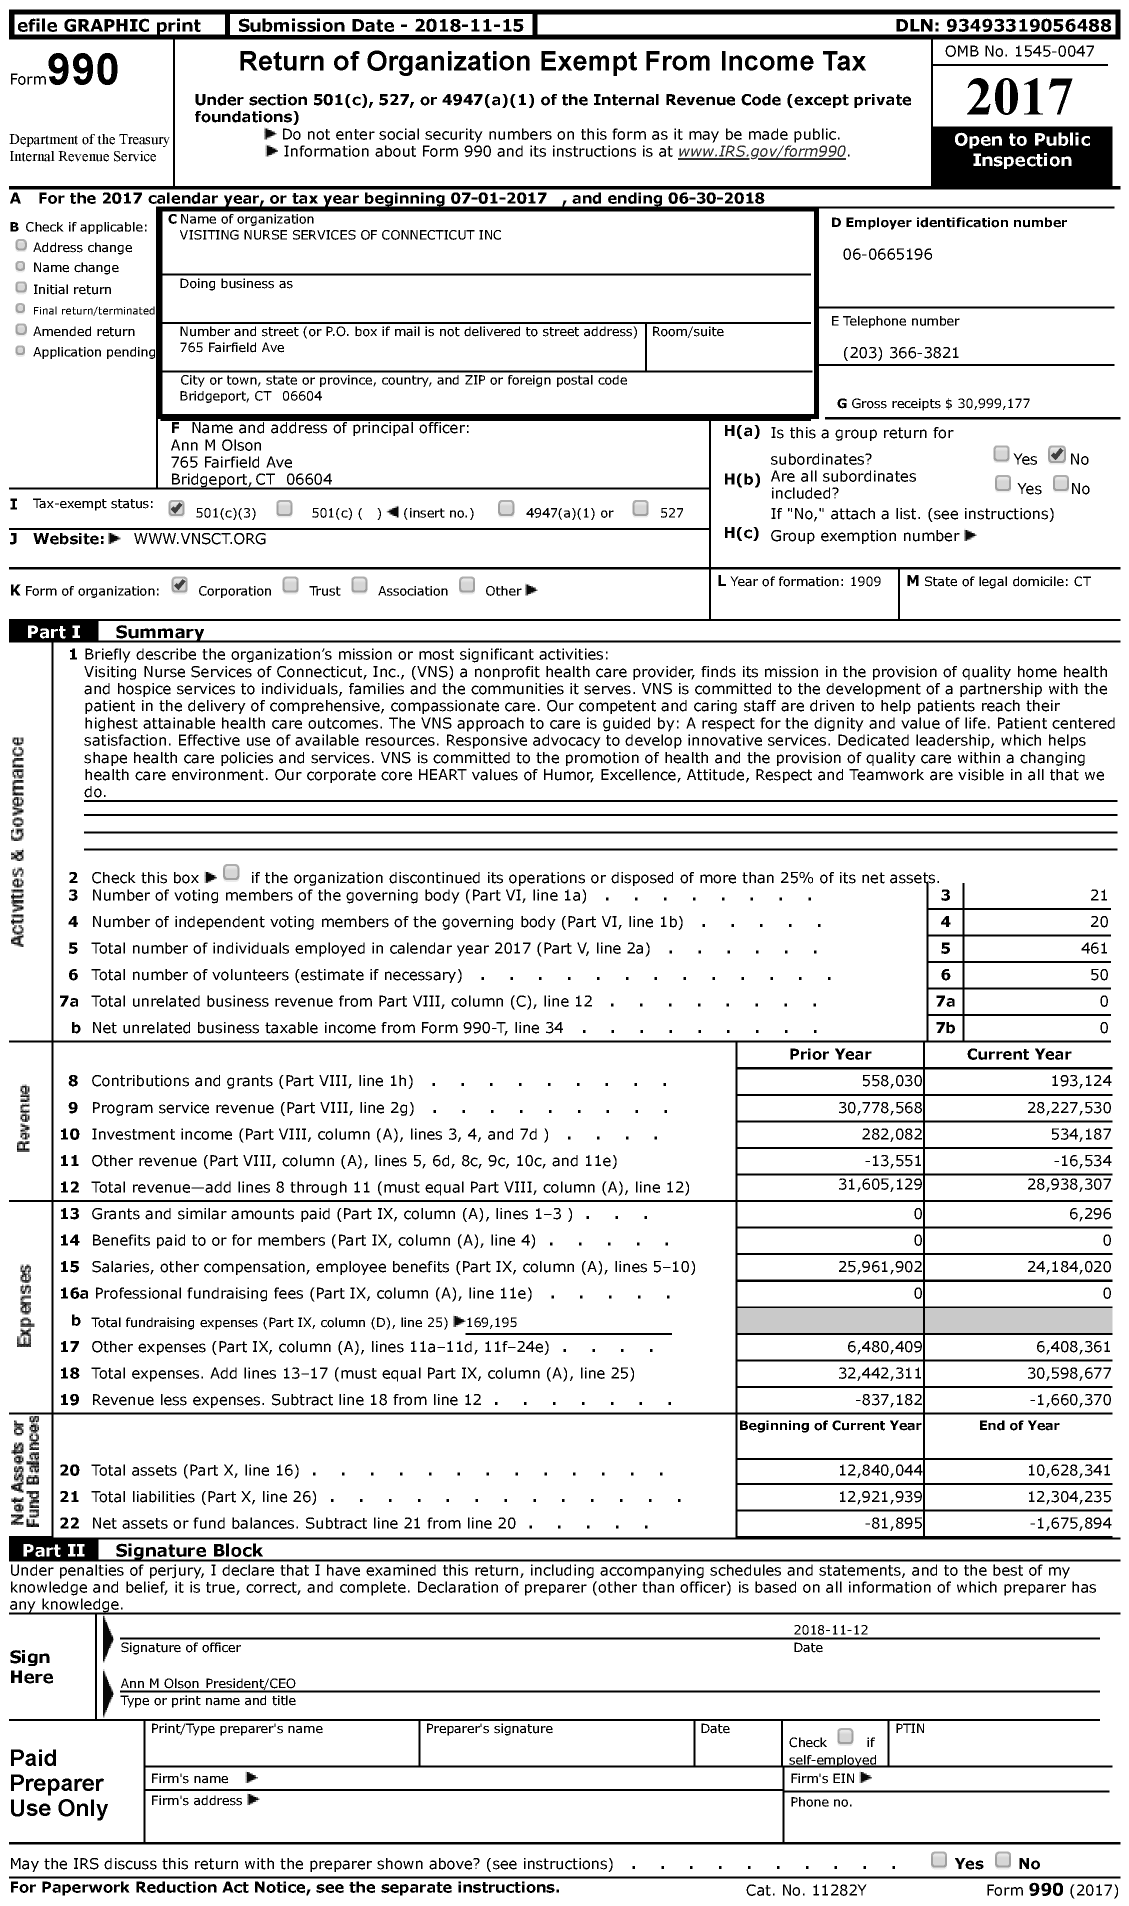 Image of first page of 2017 Form 990 for Visiting Nurse Services of Connecticut